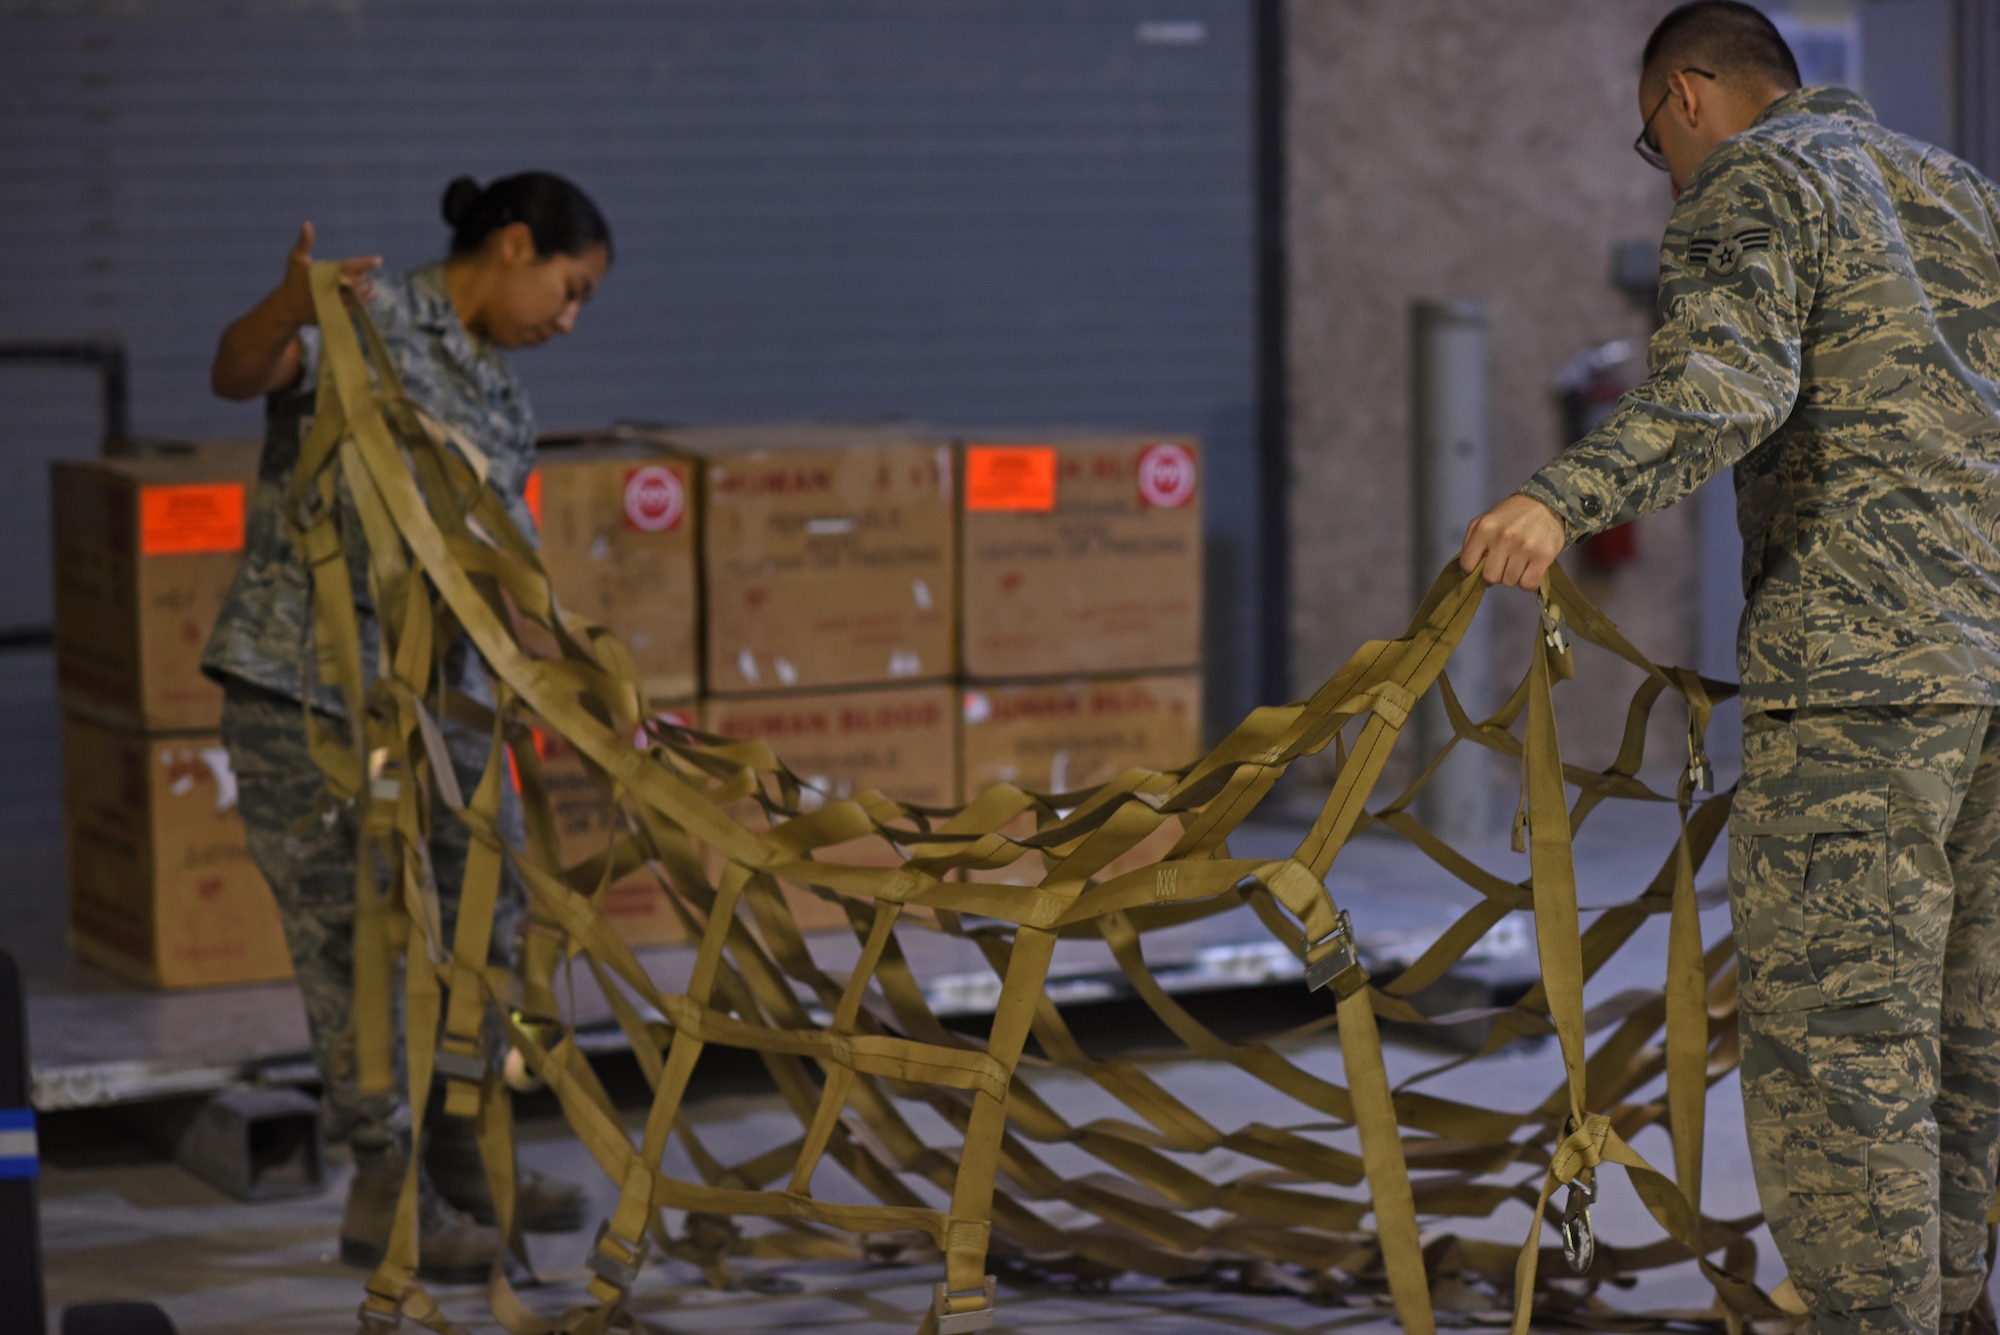 U.S. Air Force Senior Airman Celina Garcia, a medical logistics technician, left, and U.S. Air Force Senior Airman Dean Blackmore, a medical laboratory technician, both with the 379th Expeditionary Medical Group blood transshipment center, untangle cargo straps to secure blood shipping containers onto a pallet at Al Udeid Air Base, Qatar, Jan. 27, 2017. These Airmen operate the only blood transshipment center for the entire Central Command area of responsibility. (U.S. Air Force photo by Senior Airman Cynthia A. Innocenti)